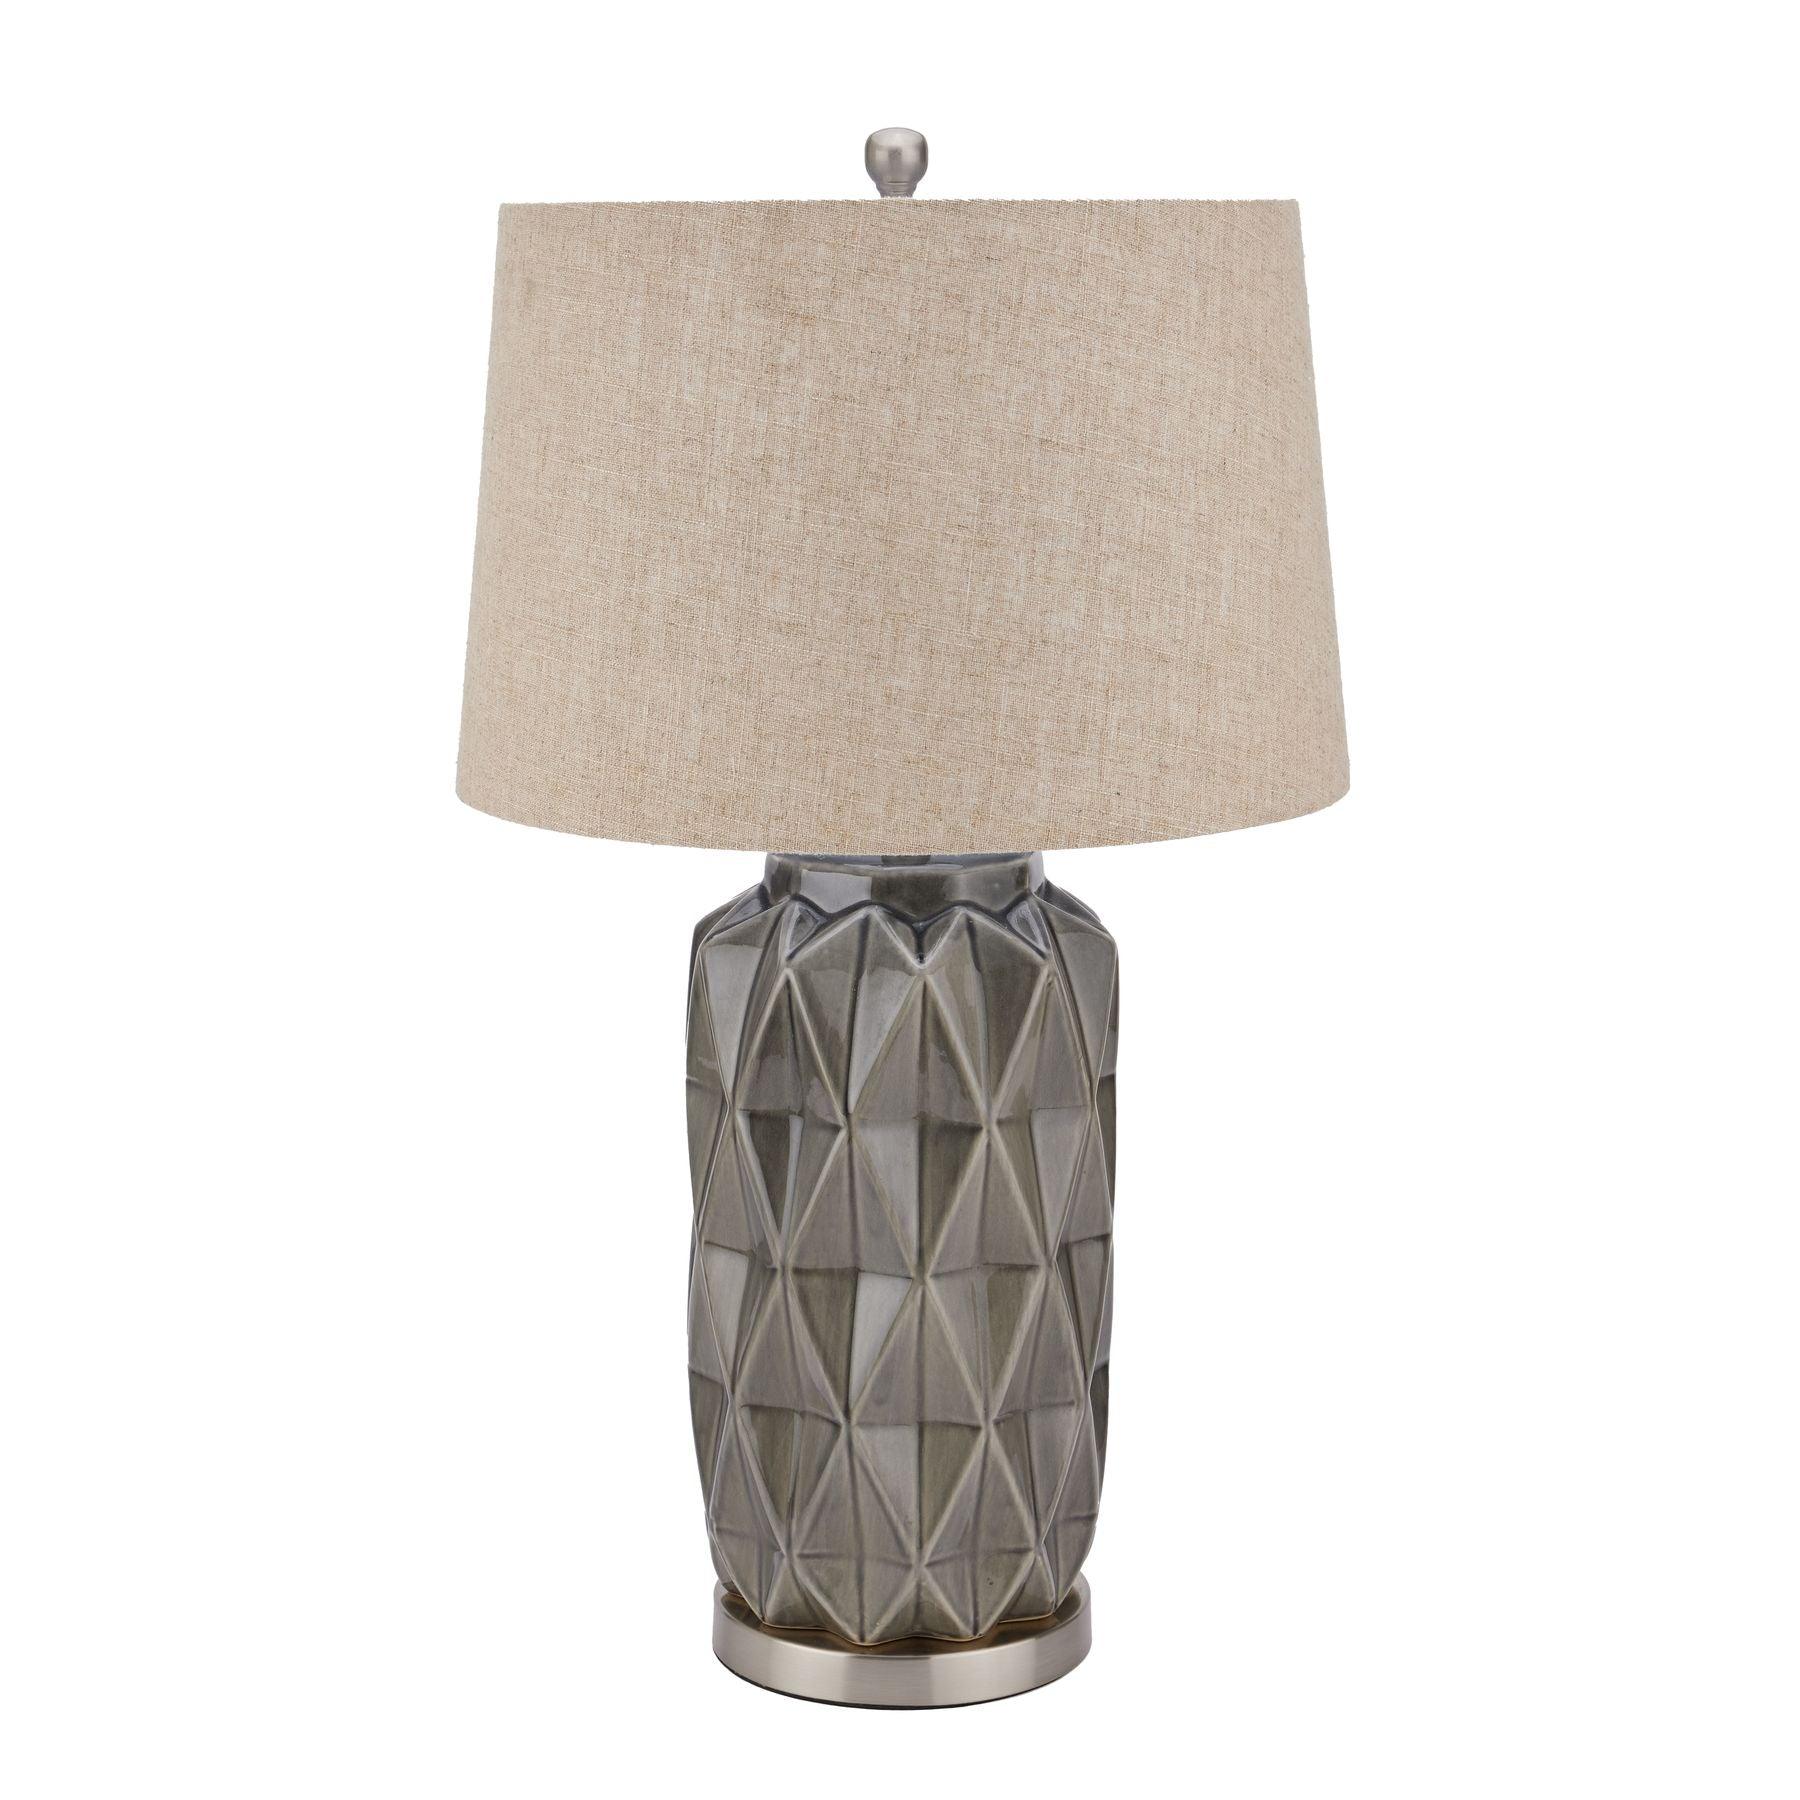 View Acantho Grey Ceramic Lamp With Linen Shade information